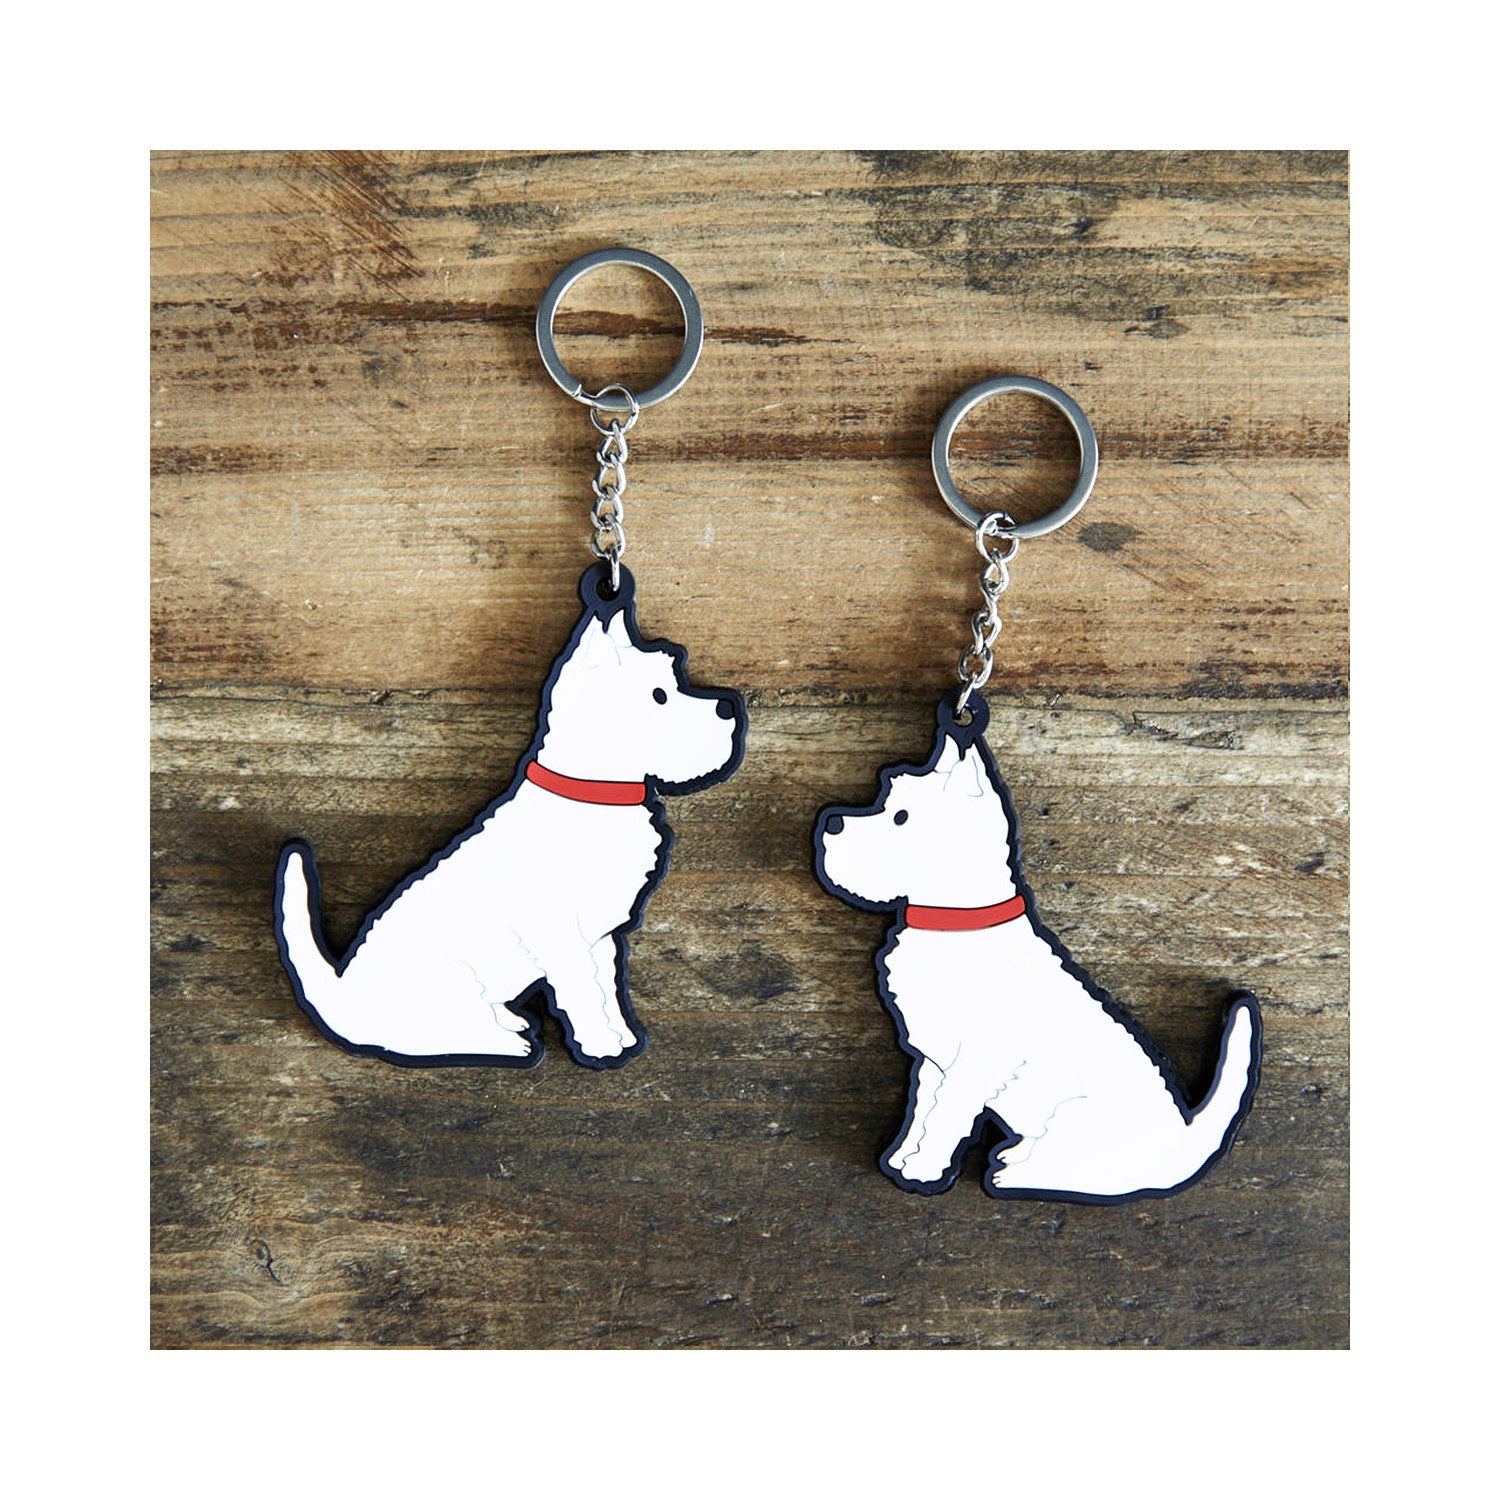 Dog Lover Gifts available at Dog Krazy Gifts - Frank the West Highland Terrier Keyring - part of the Sweet William range available from Dog Krazy Gifts